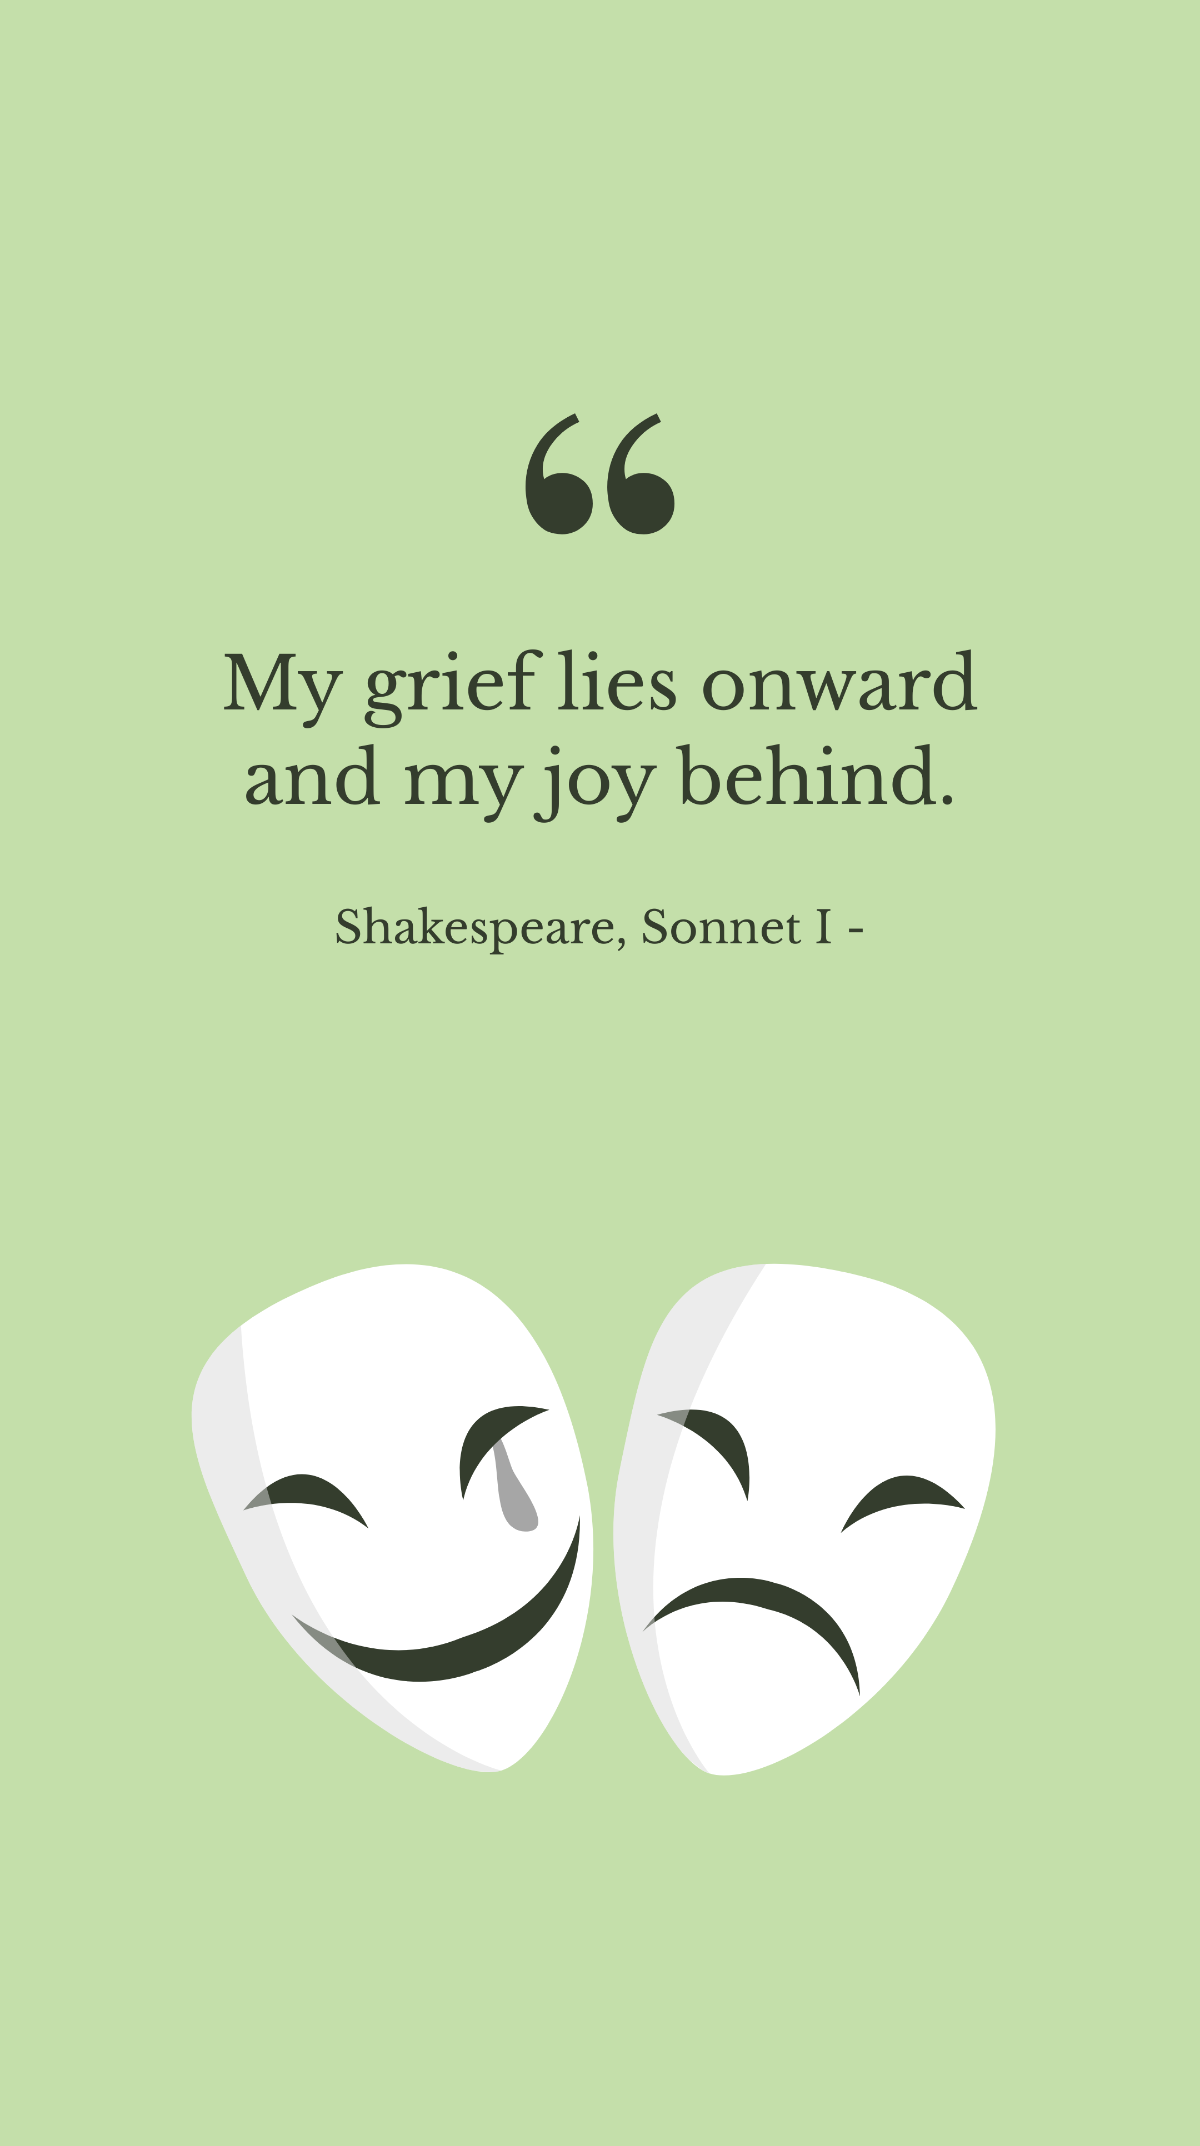 Free Shakespeare, Sonnet I - My grief lies onward and my joy behind. Template